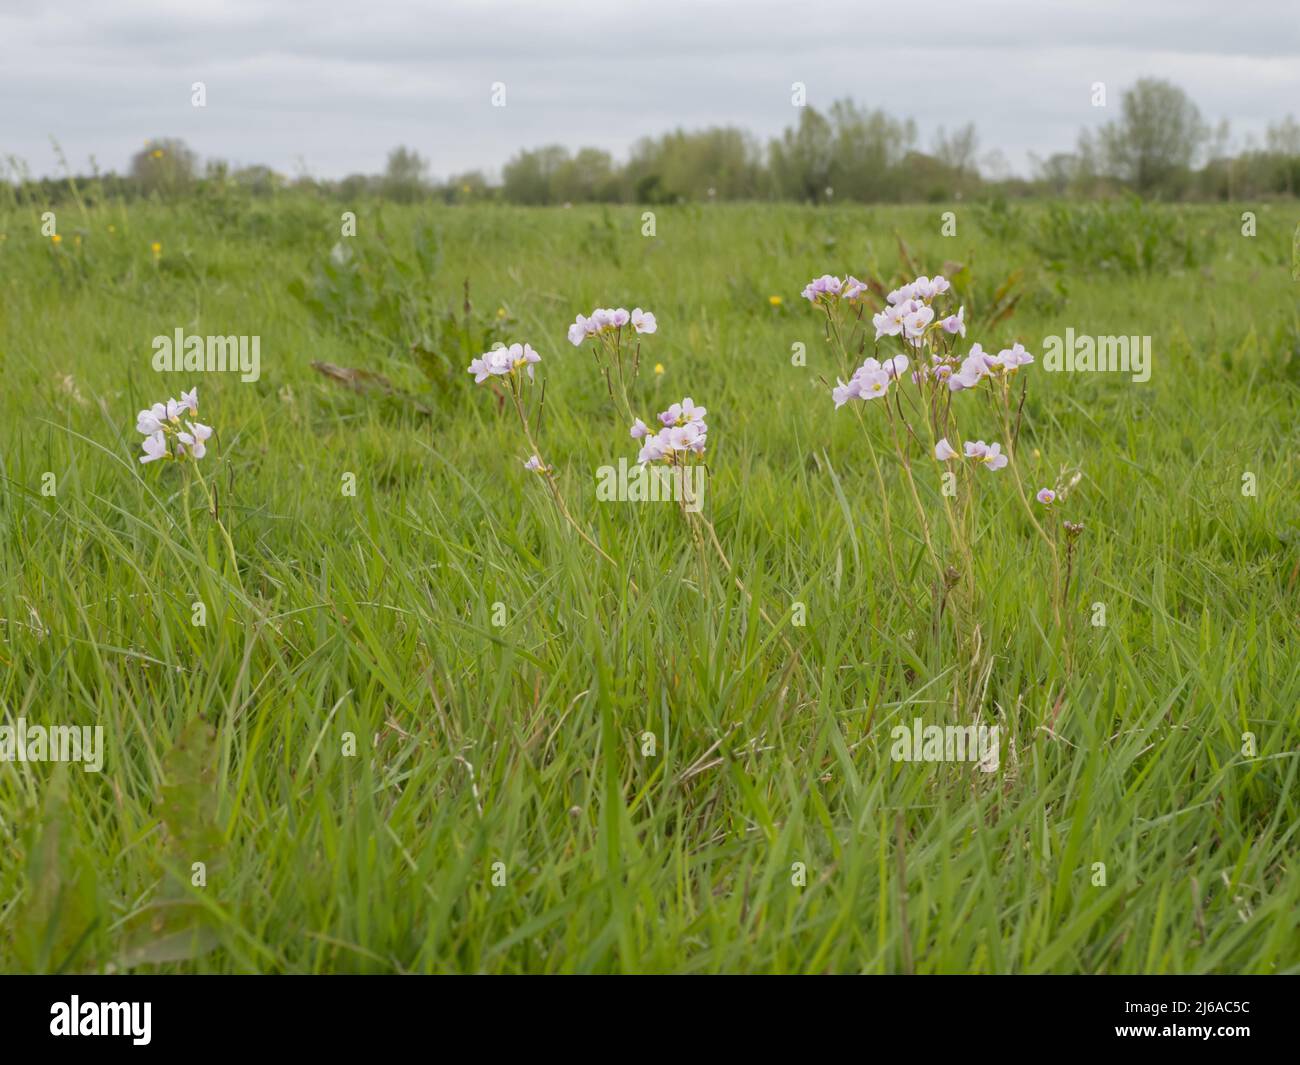 Cardamine pratensis, the cuckoo flower, also known as lady's smock, mayflower, or milkmaids. Stock Photo